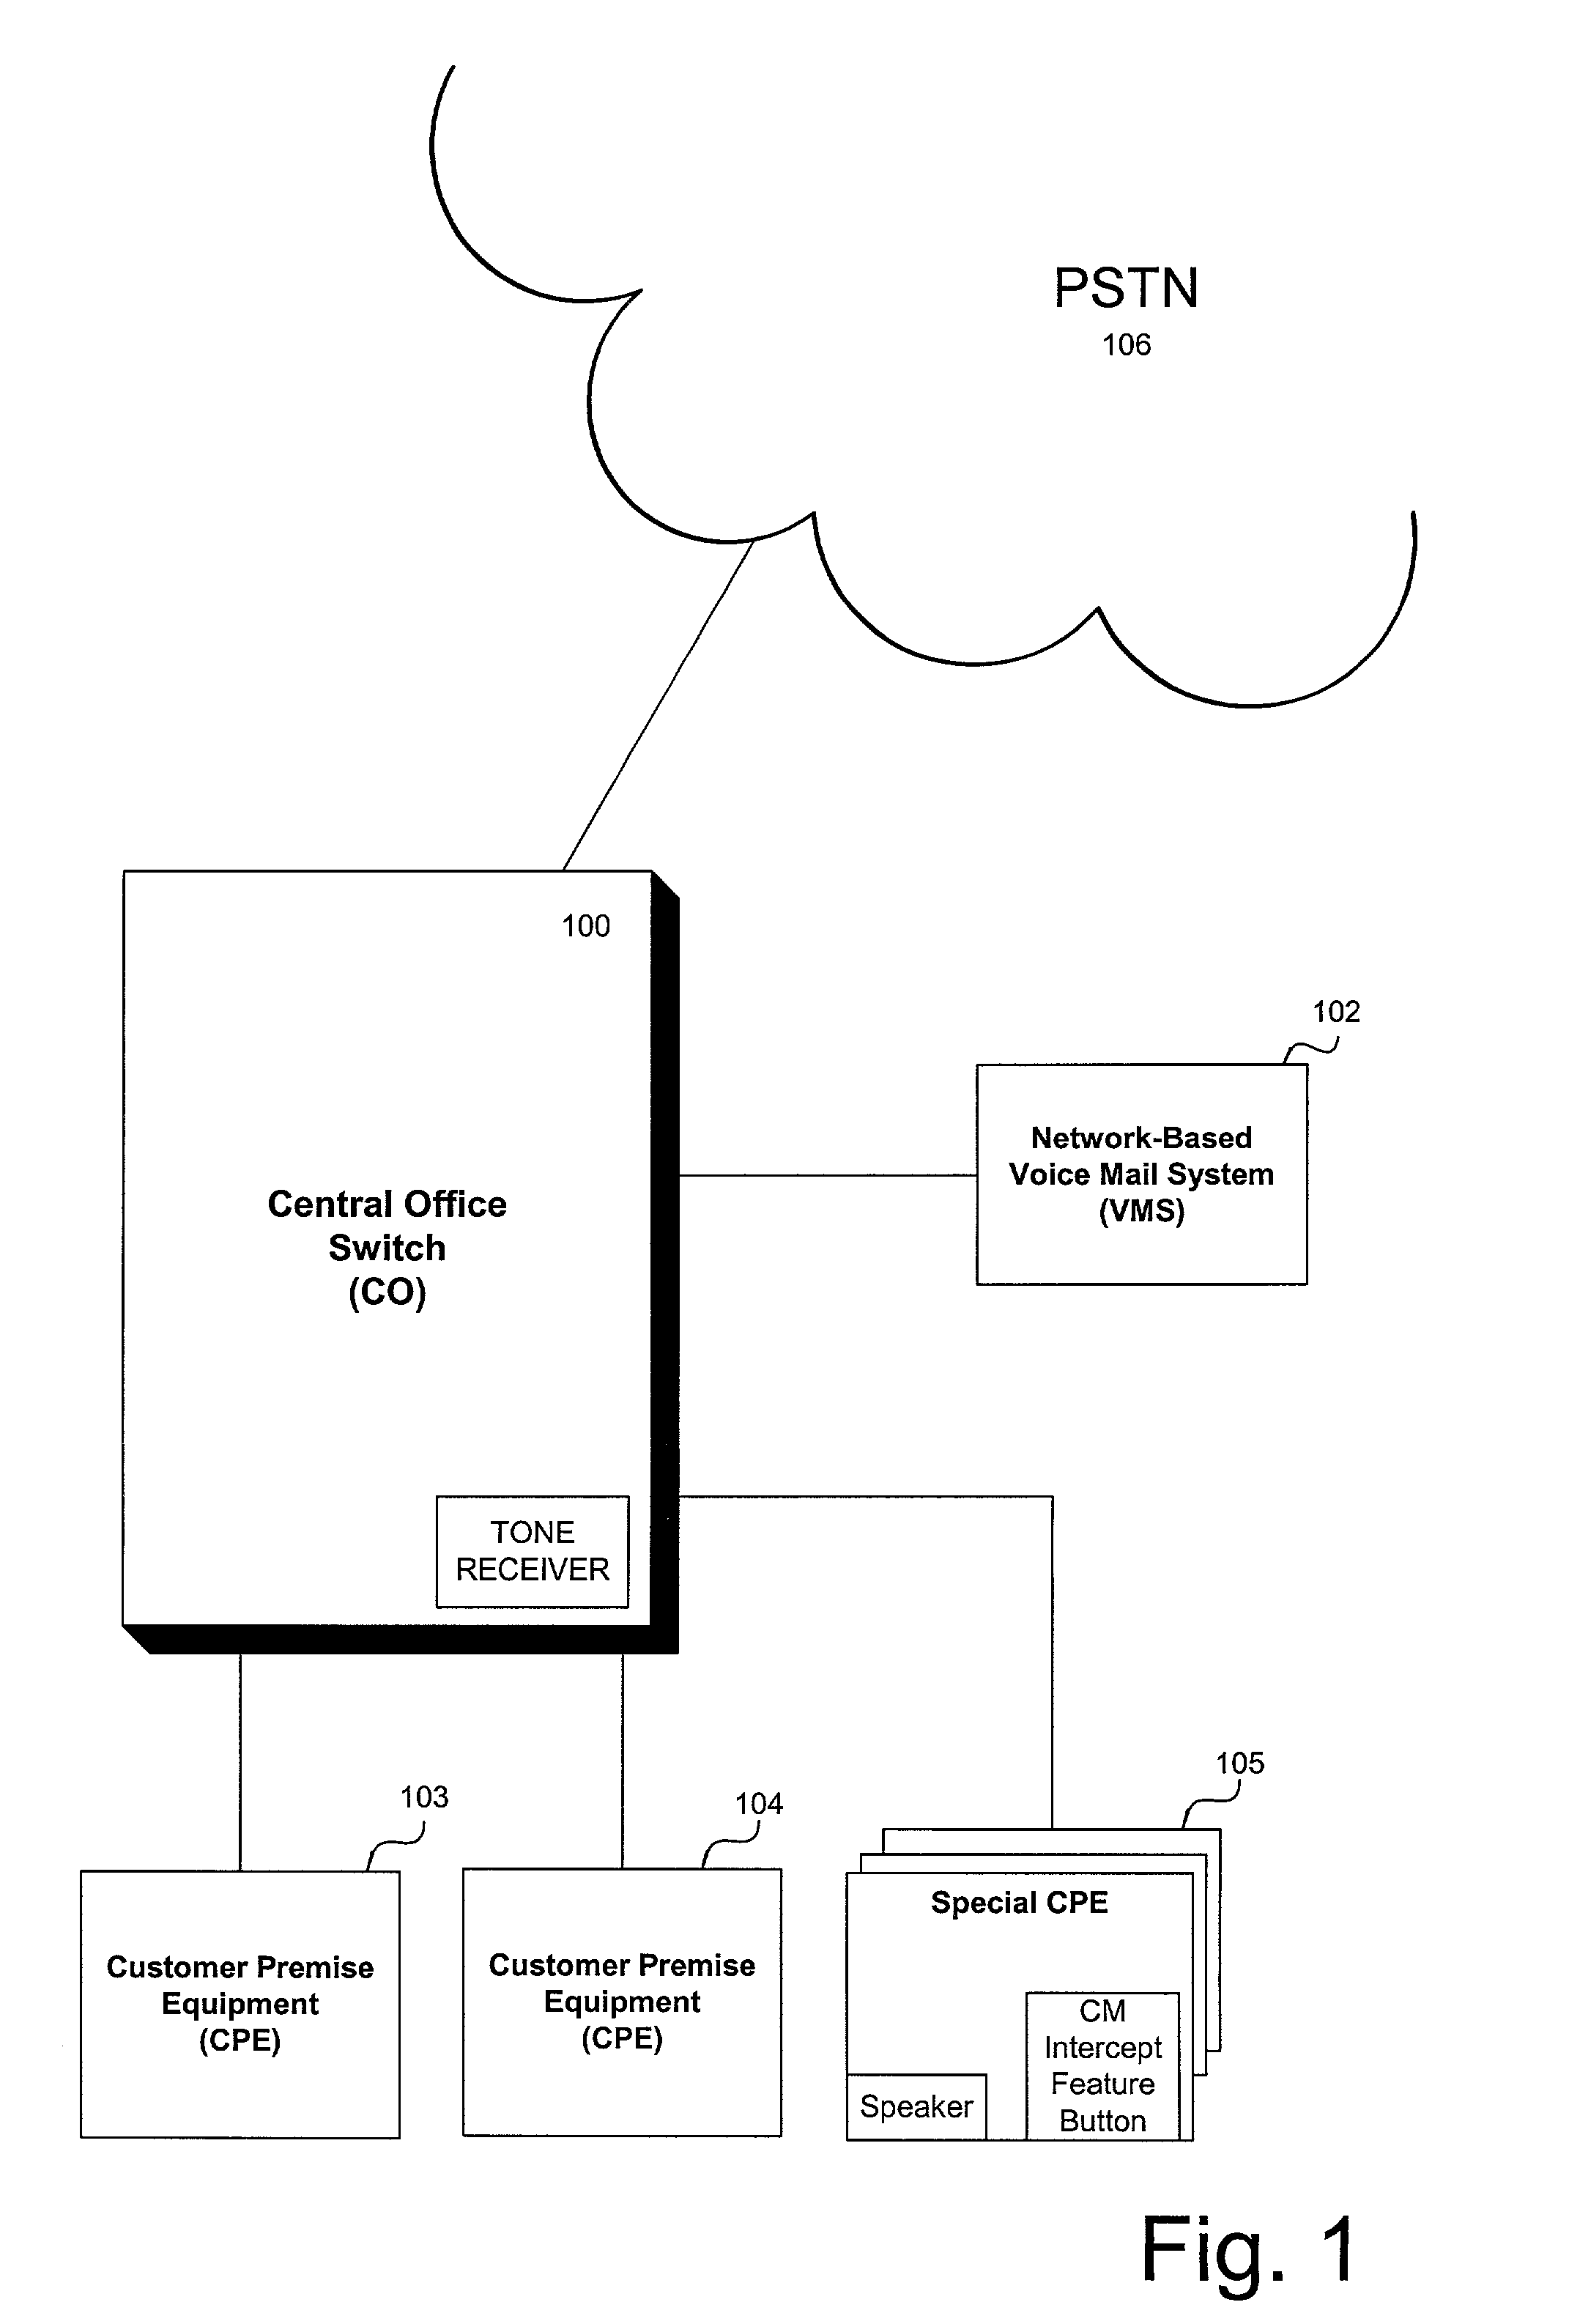 Monitoring a call forwarded to a network-based voice mail system